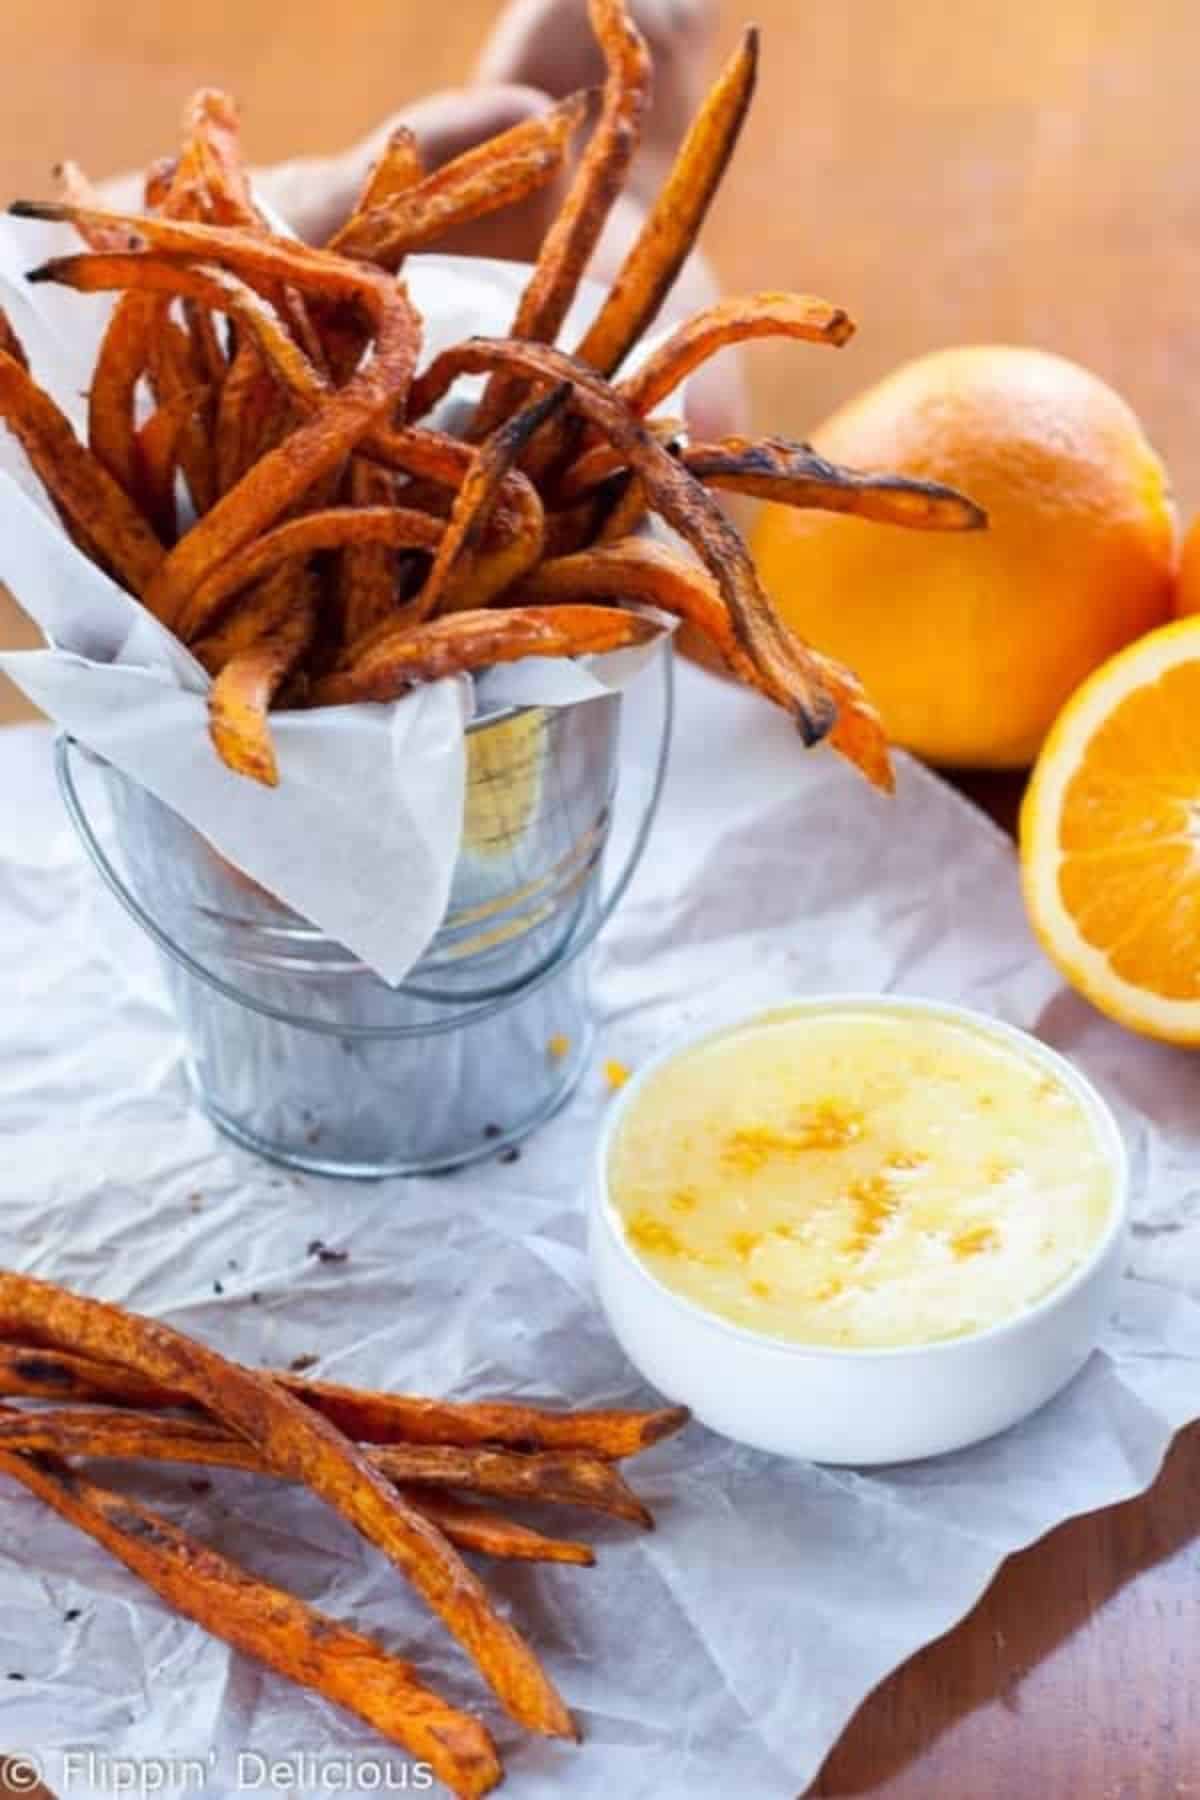 Crispy Baked Sweet Potato Fries With Orange Zest Icing Dipping Sauce on a table.